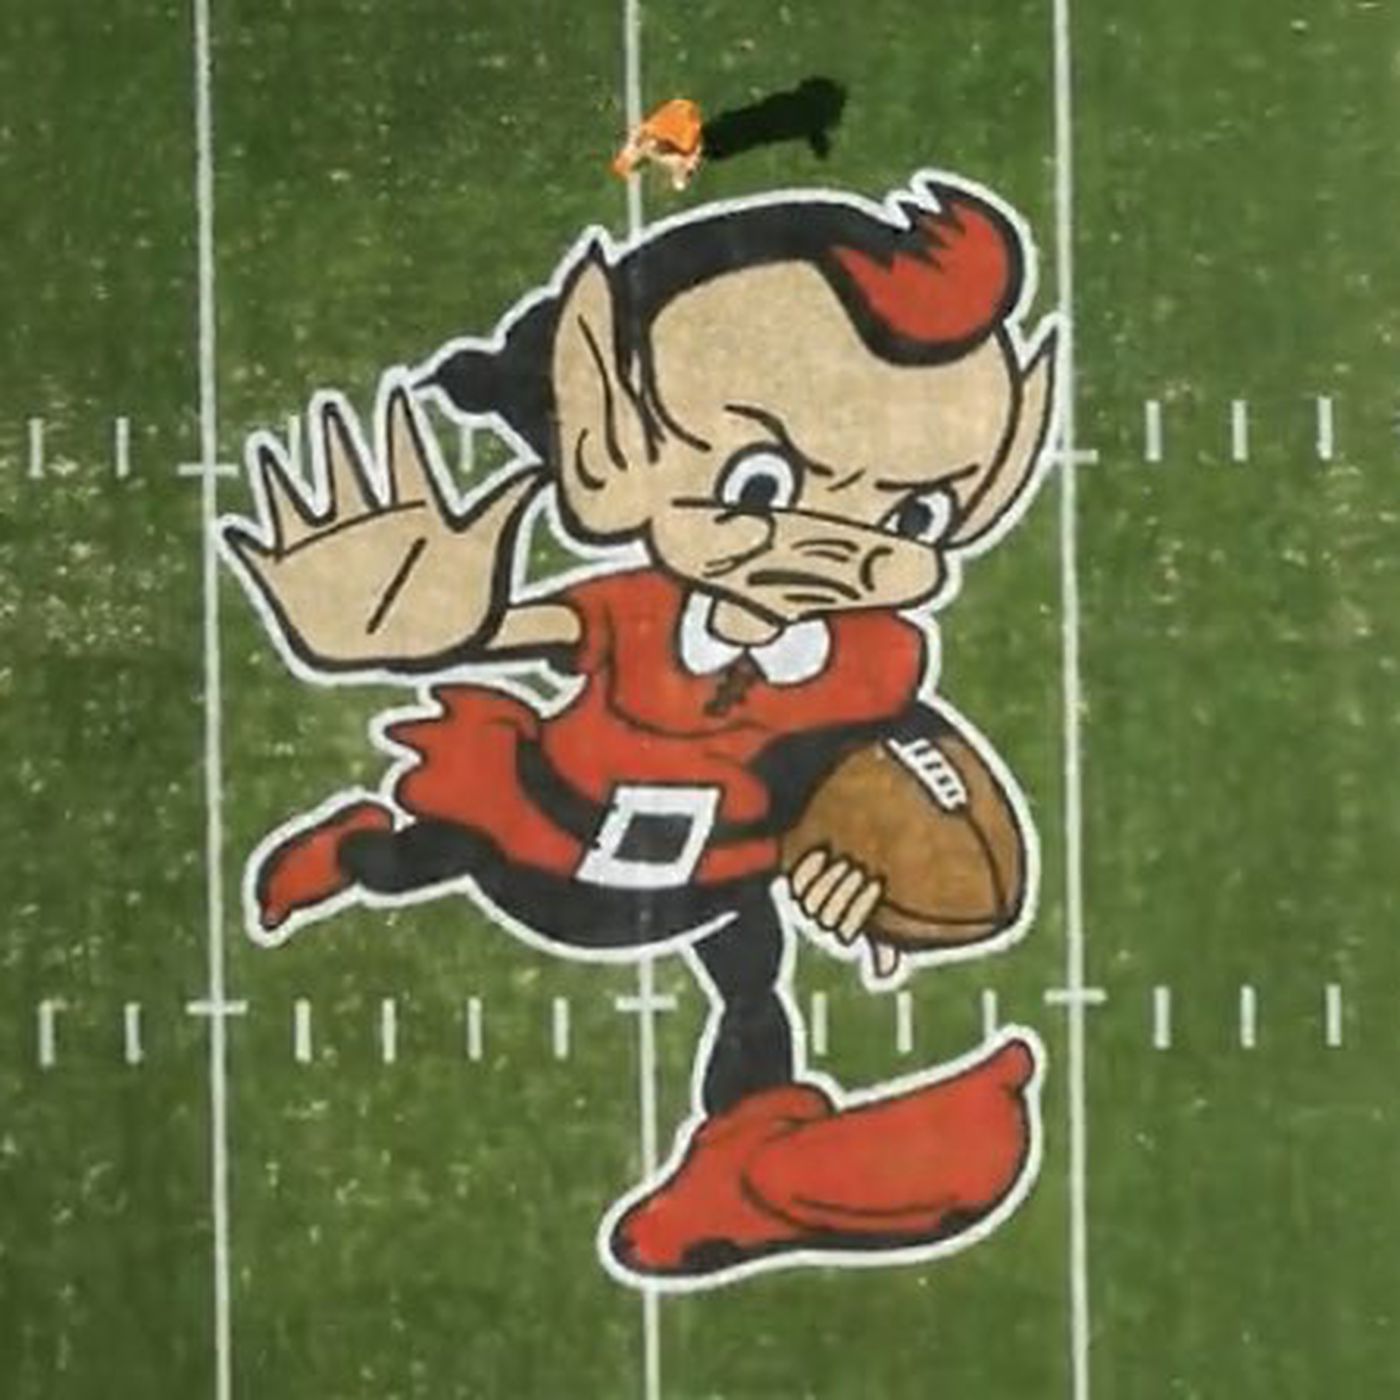 Browns introduce midfield artwork which is: Brownie the Elf By Nature